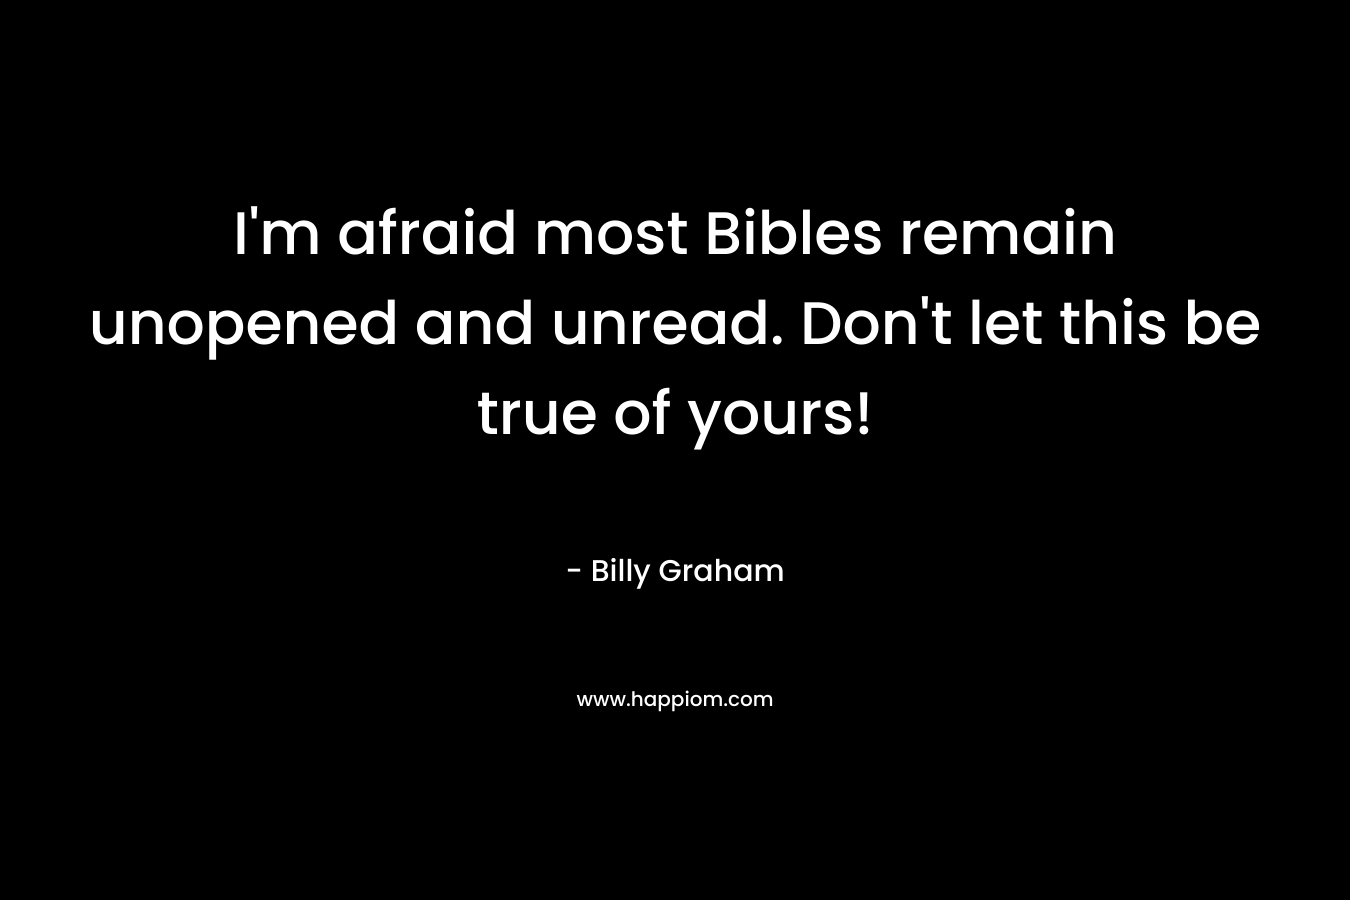 I’m afraid most Bibles remain unopened and unread. Don’t let this be true of yours! – Billy Graham